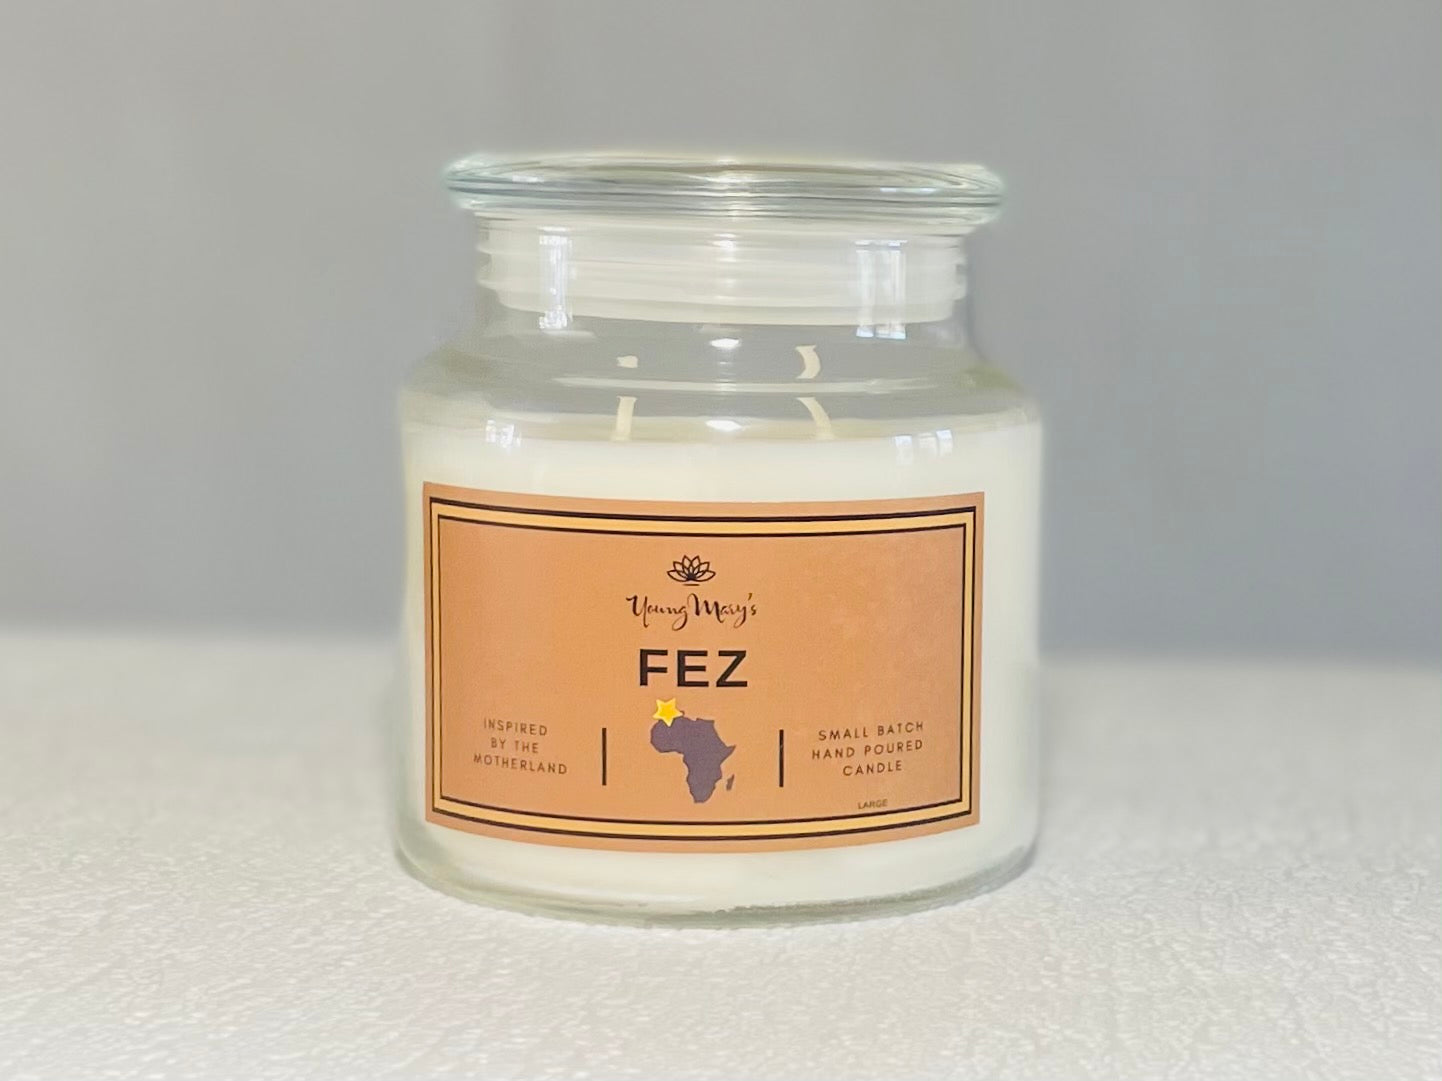 Fez - exotic and spicy